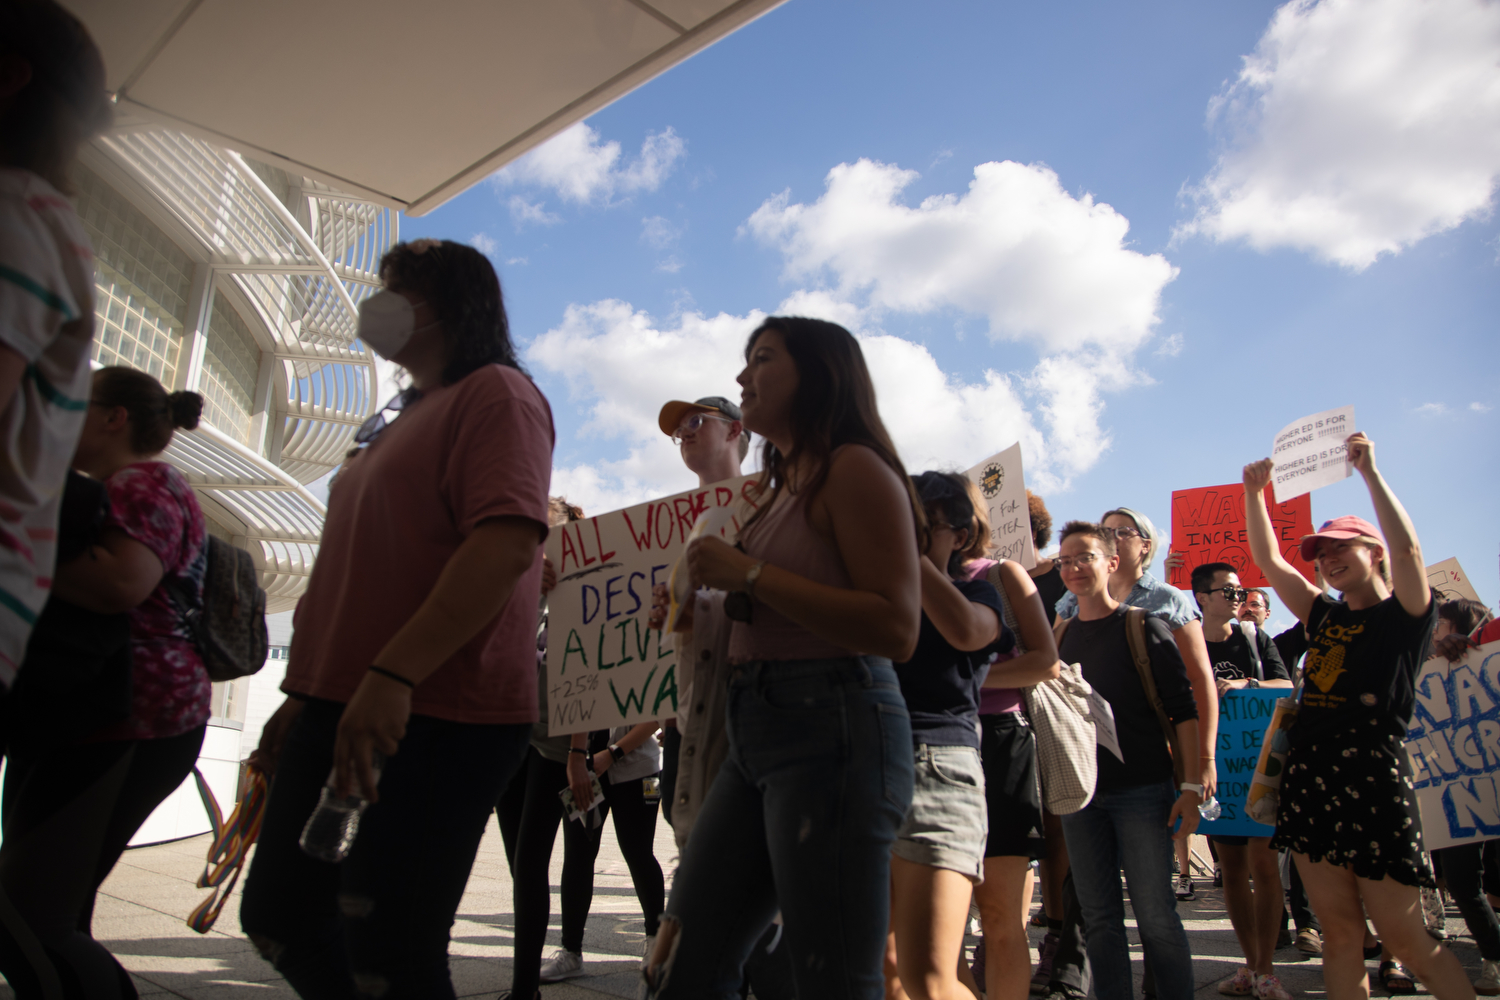 A group marches into the Levitt Center for Advancement during the COGS protest on Wednesday, Sept. 27 2023. The group came with demands of making education accessible and wages competitive. The meeting adjourned once COGS protesters marched in chanting.